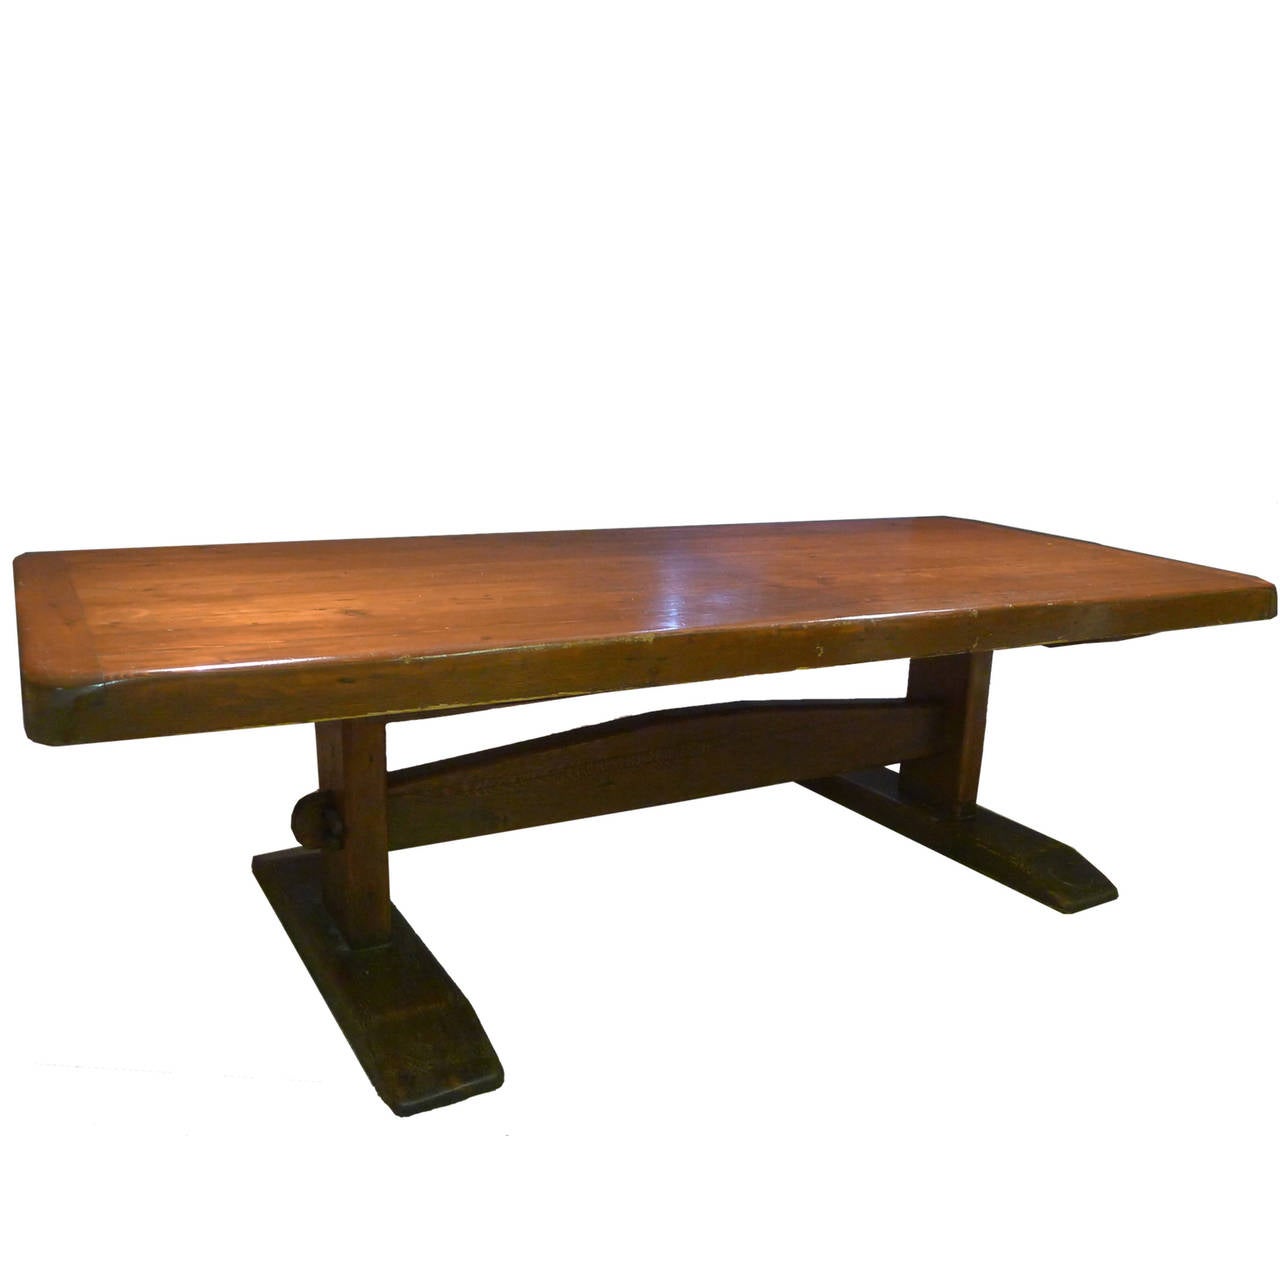 Stained Monumental 8 1/2 Foot Long Early American Solid Pine Trestle Farm or Work Table